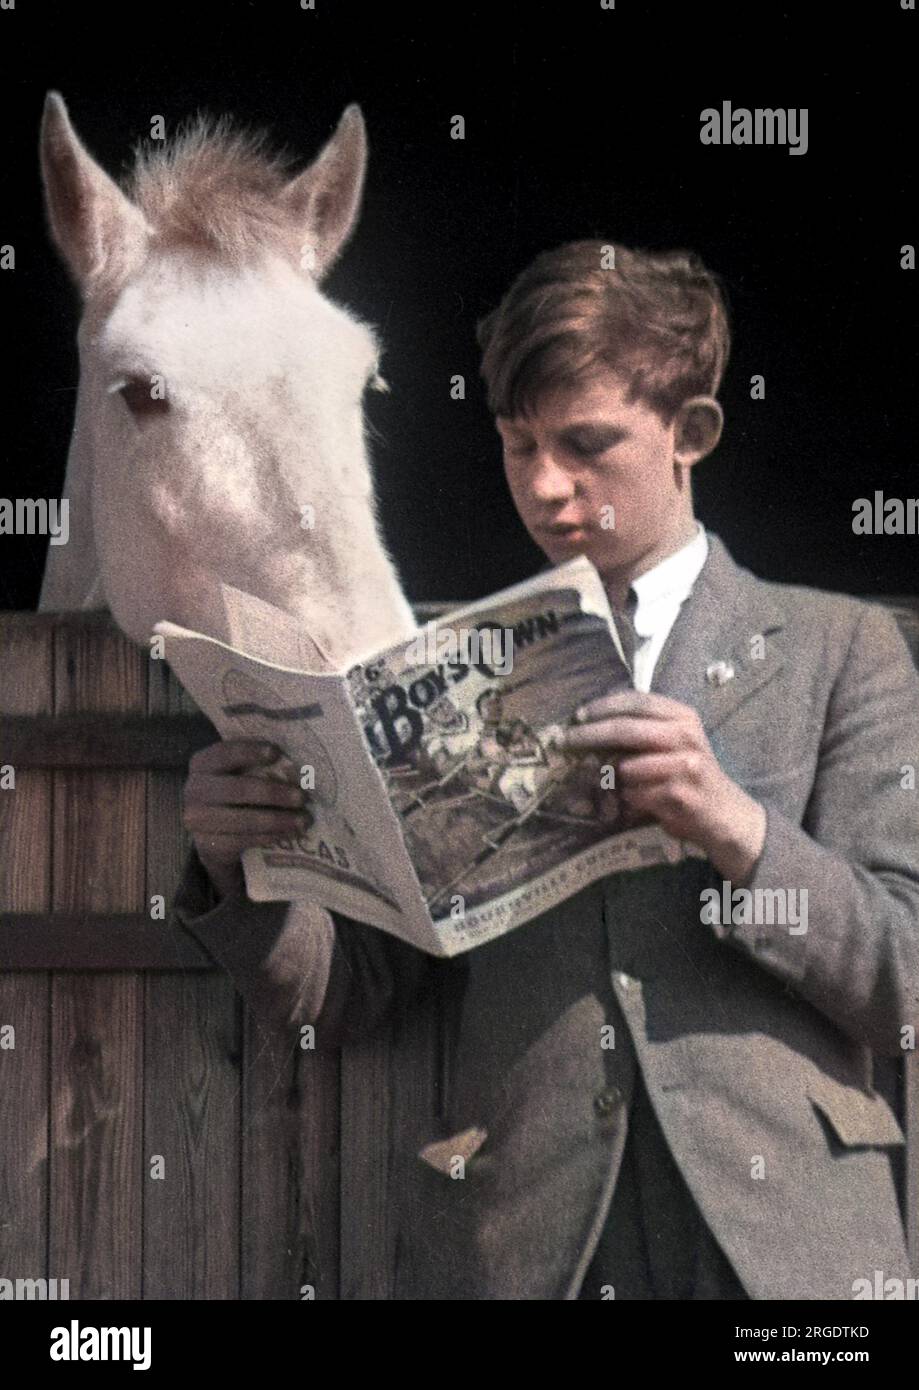 A boy stands reading his Boy's Own magazine, while a white horse appears to be reading over his shoulder. Stock Photo